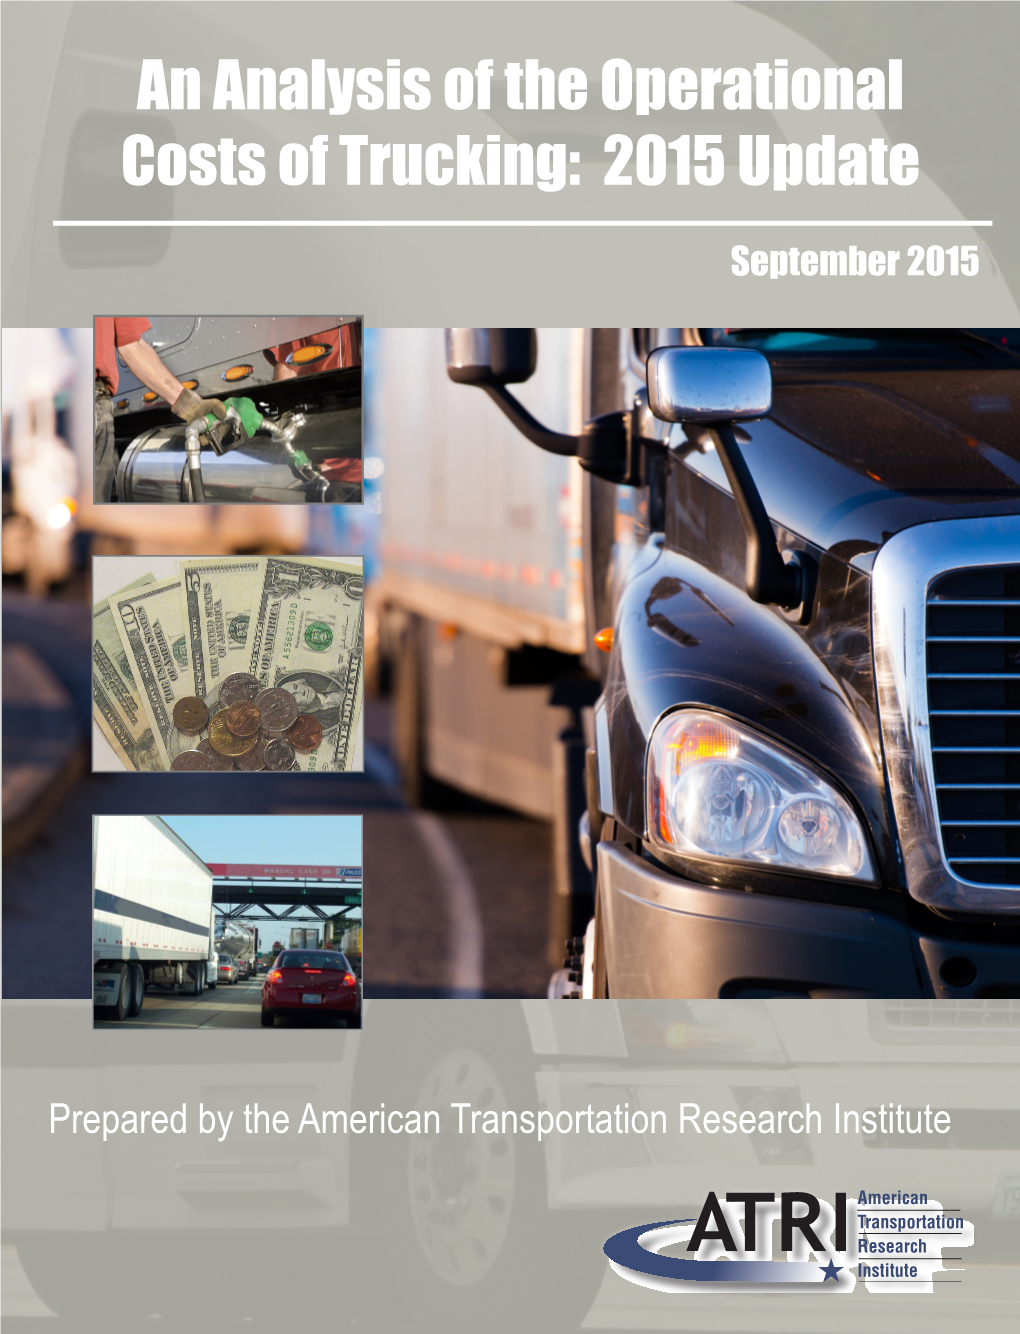 An Analysis of the Operational Costs of Trucking: 2015 Update